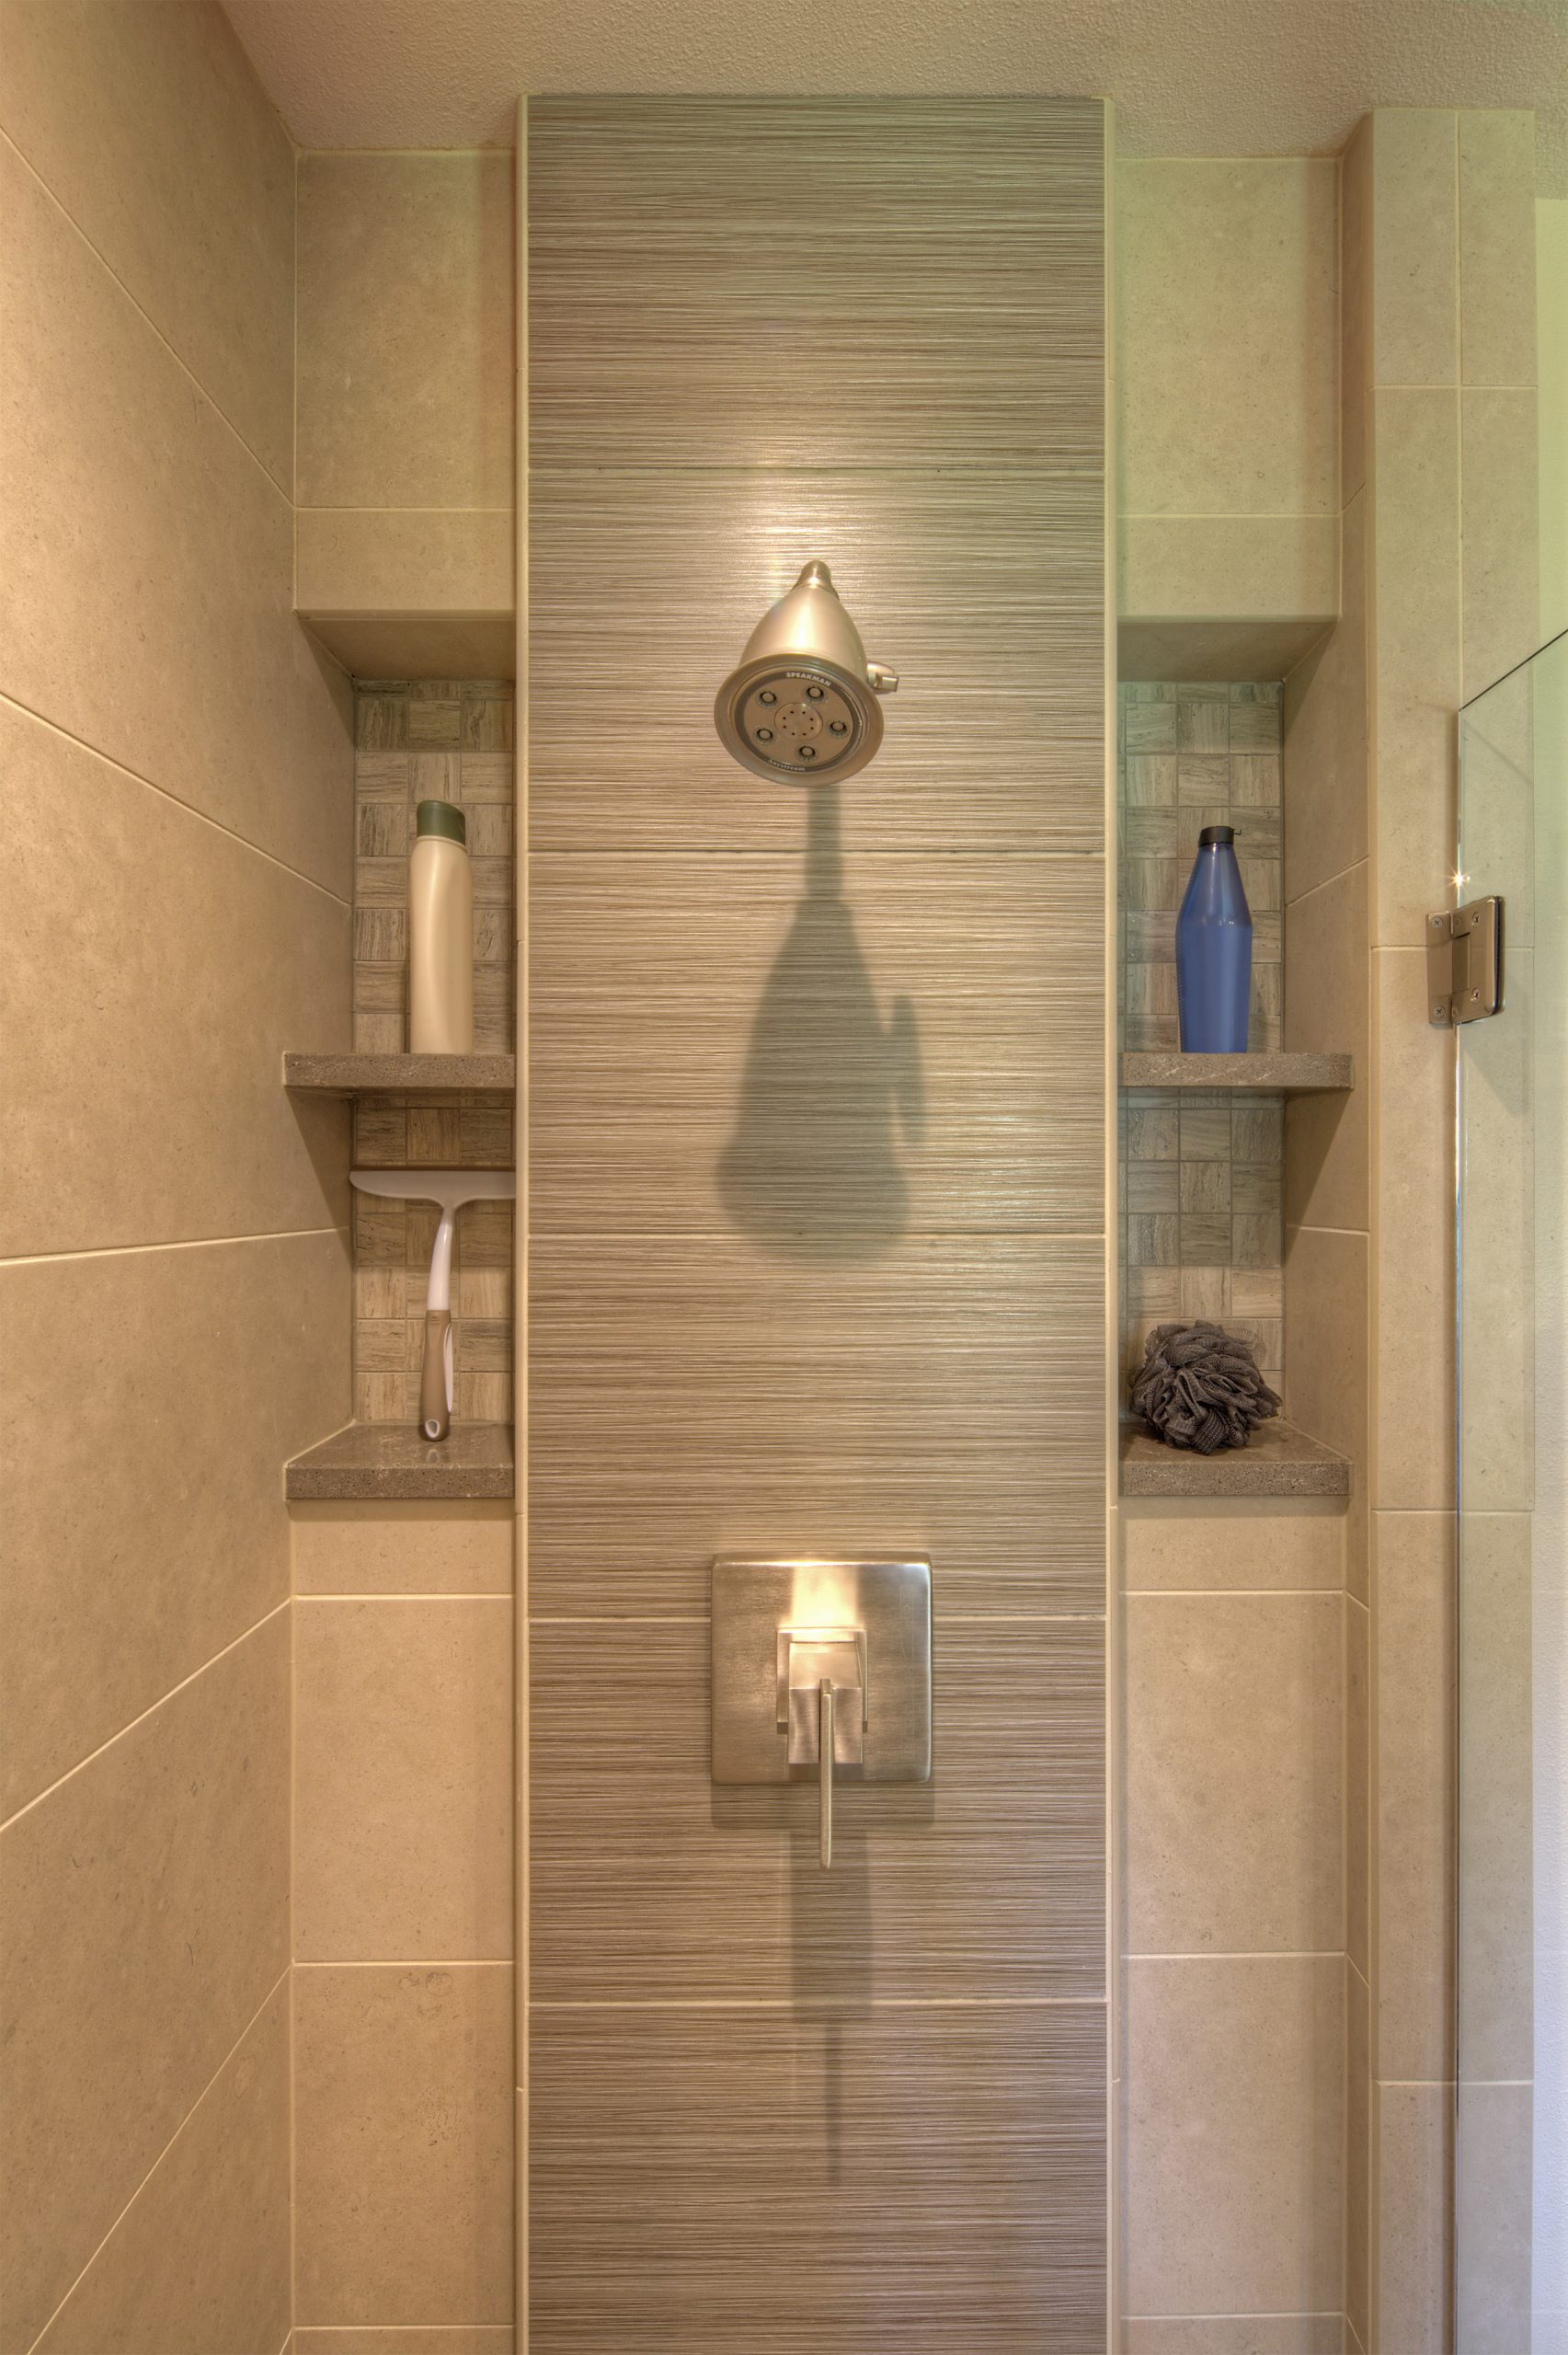 Homeowners spent more on bathroom renovations this year, Houzz finds